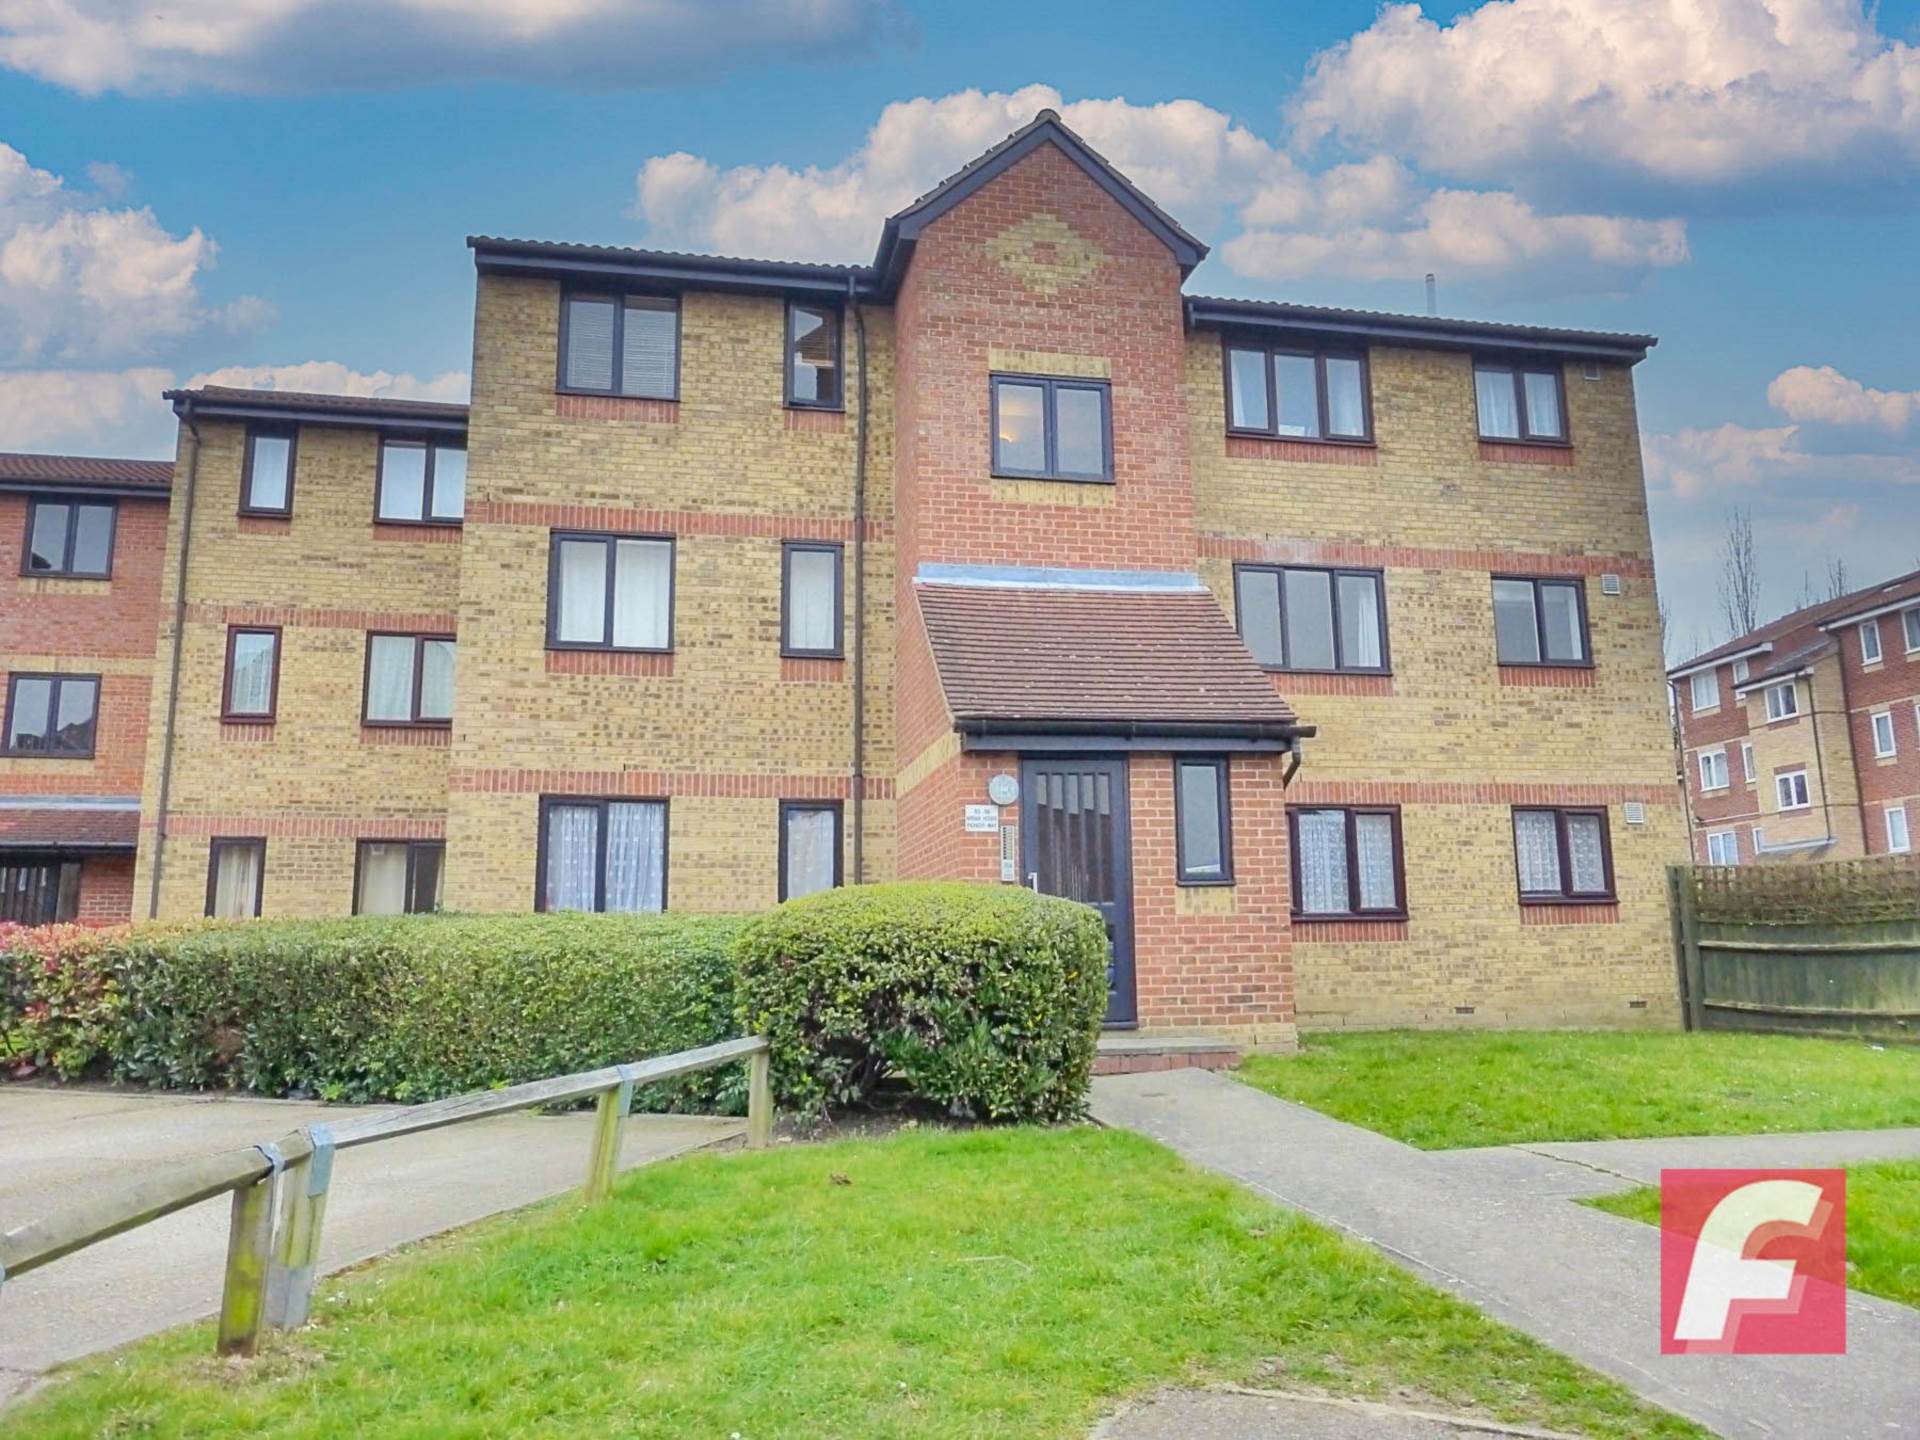 1 bed Studio for rent in Watford. From Fairfield Estate Agents - Watford Branch